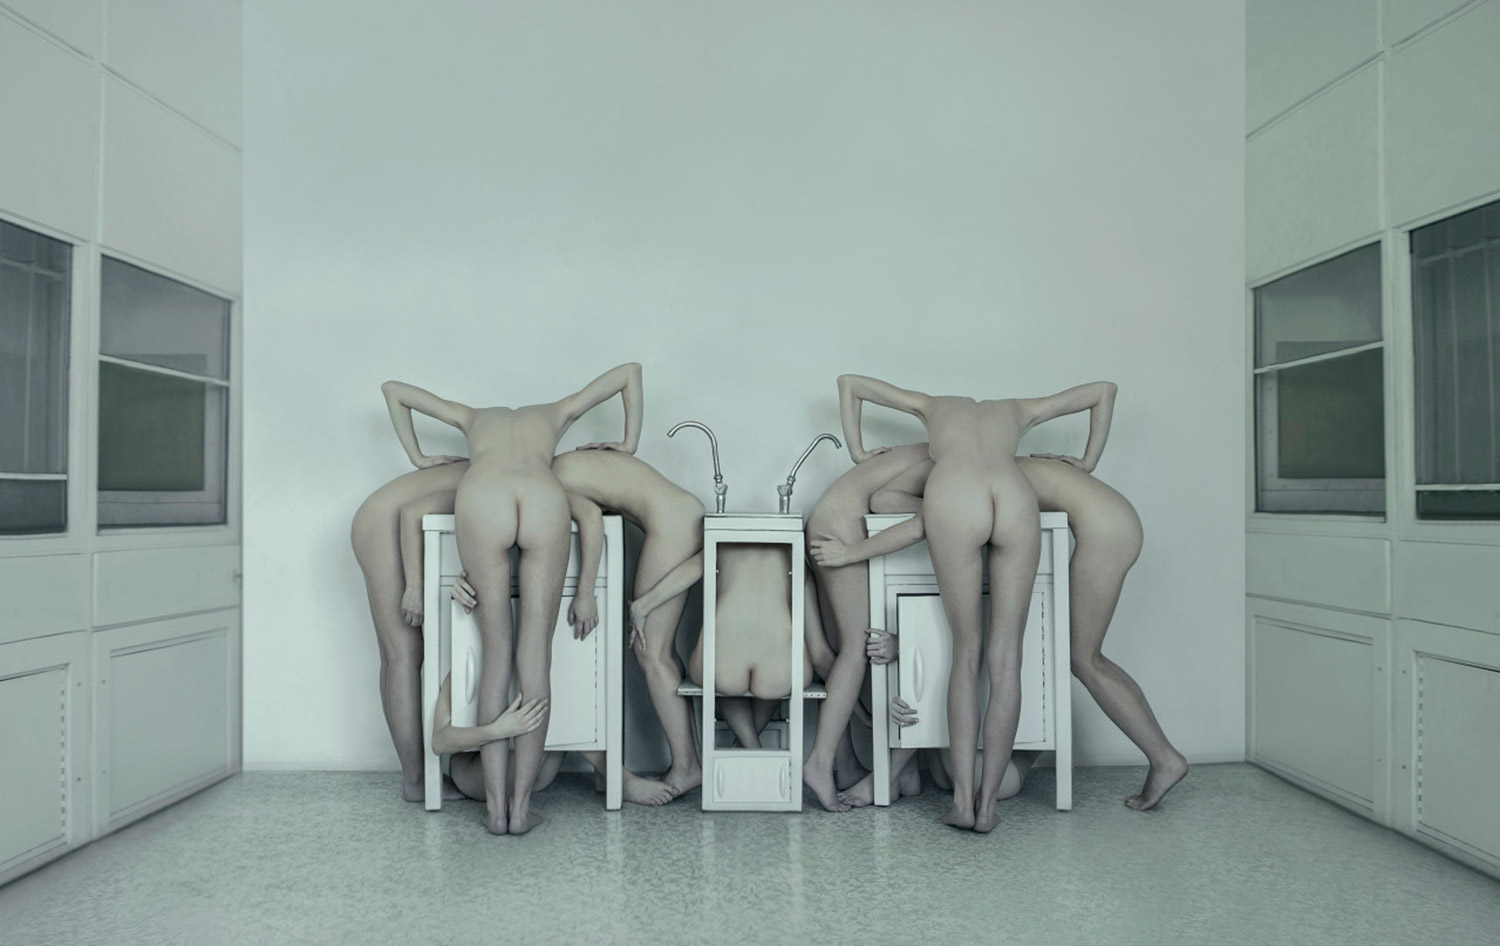 Evelyn Bencicova, Ecce Homo, nude bodies in geometric forms around sinks